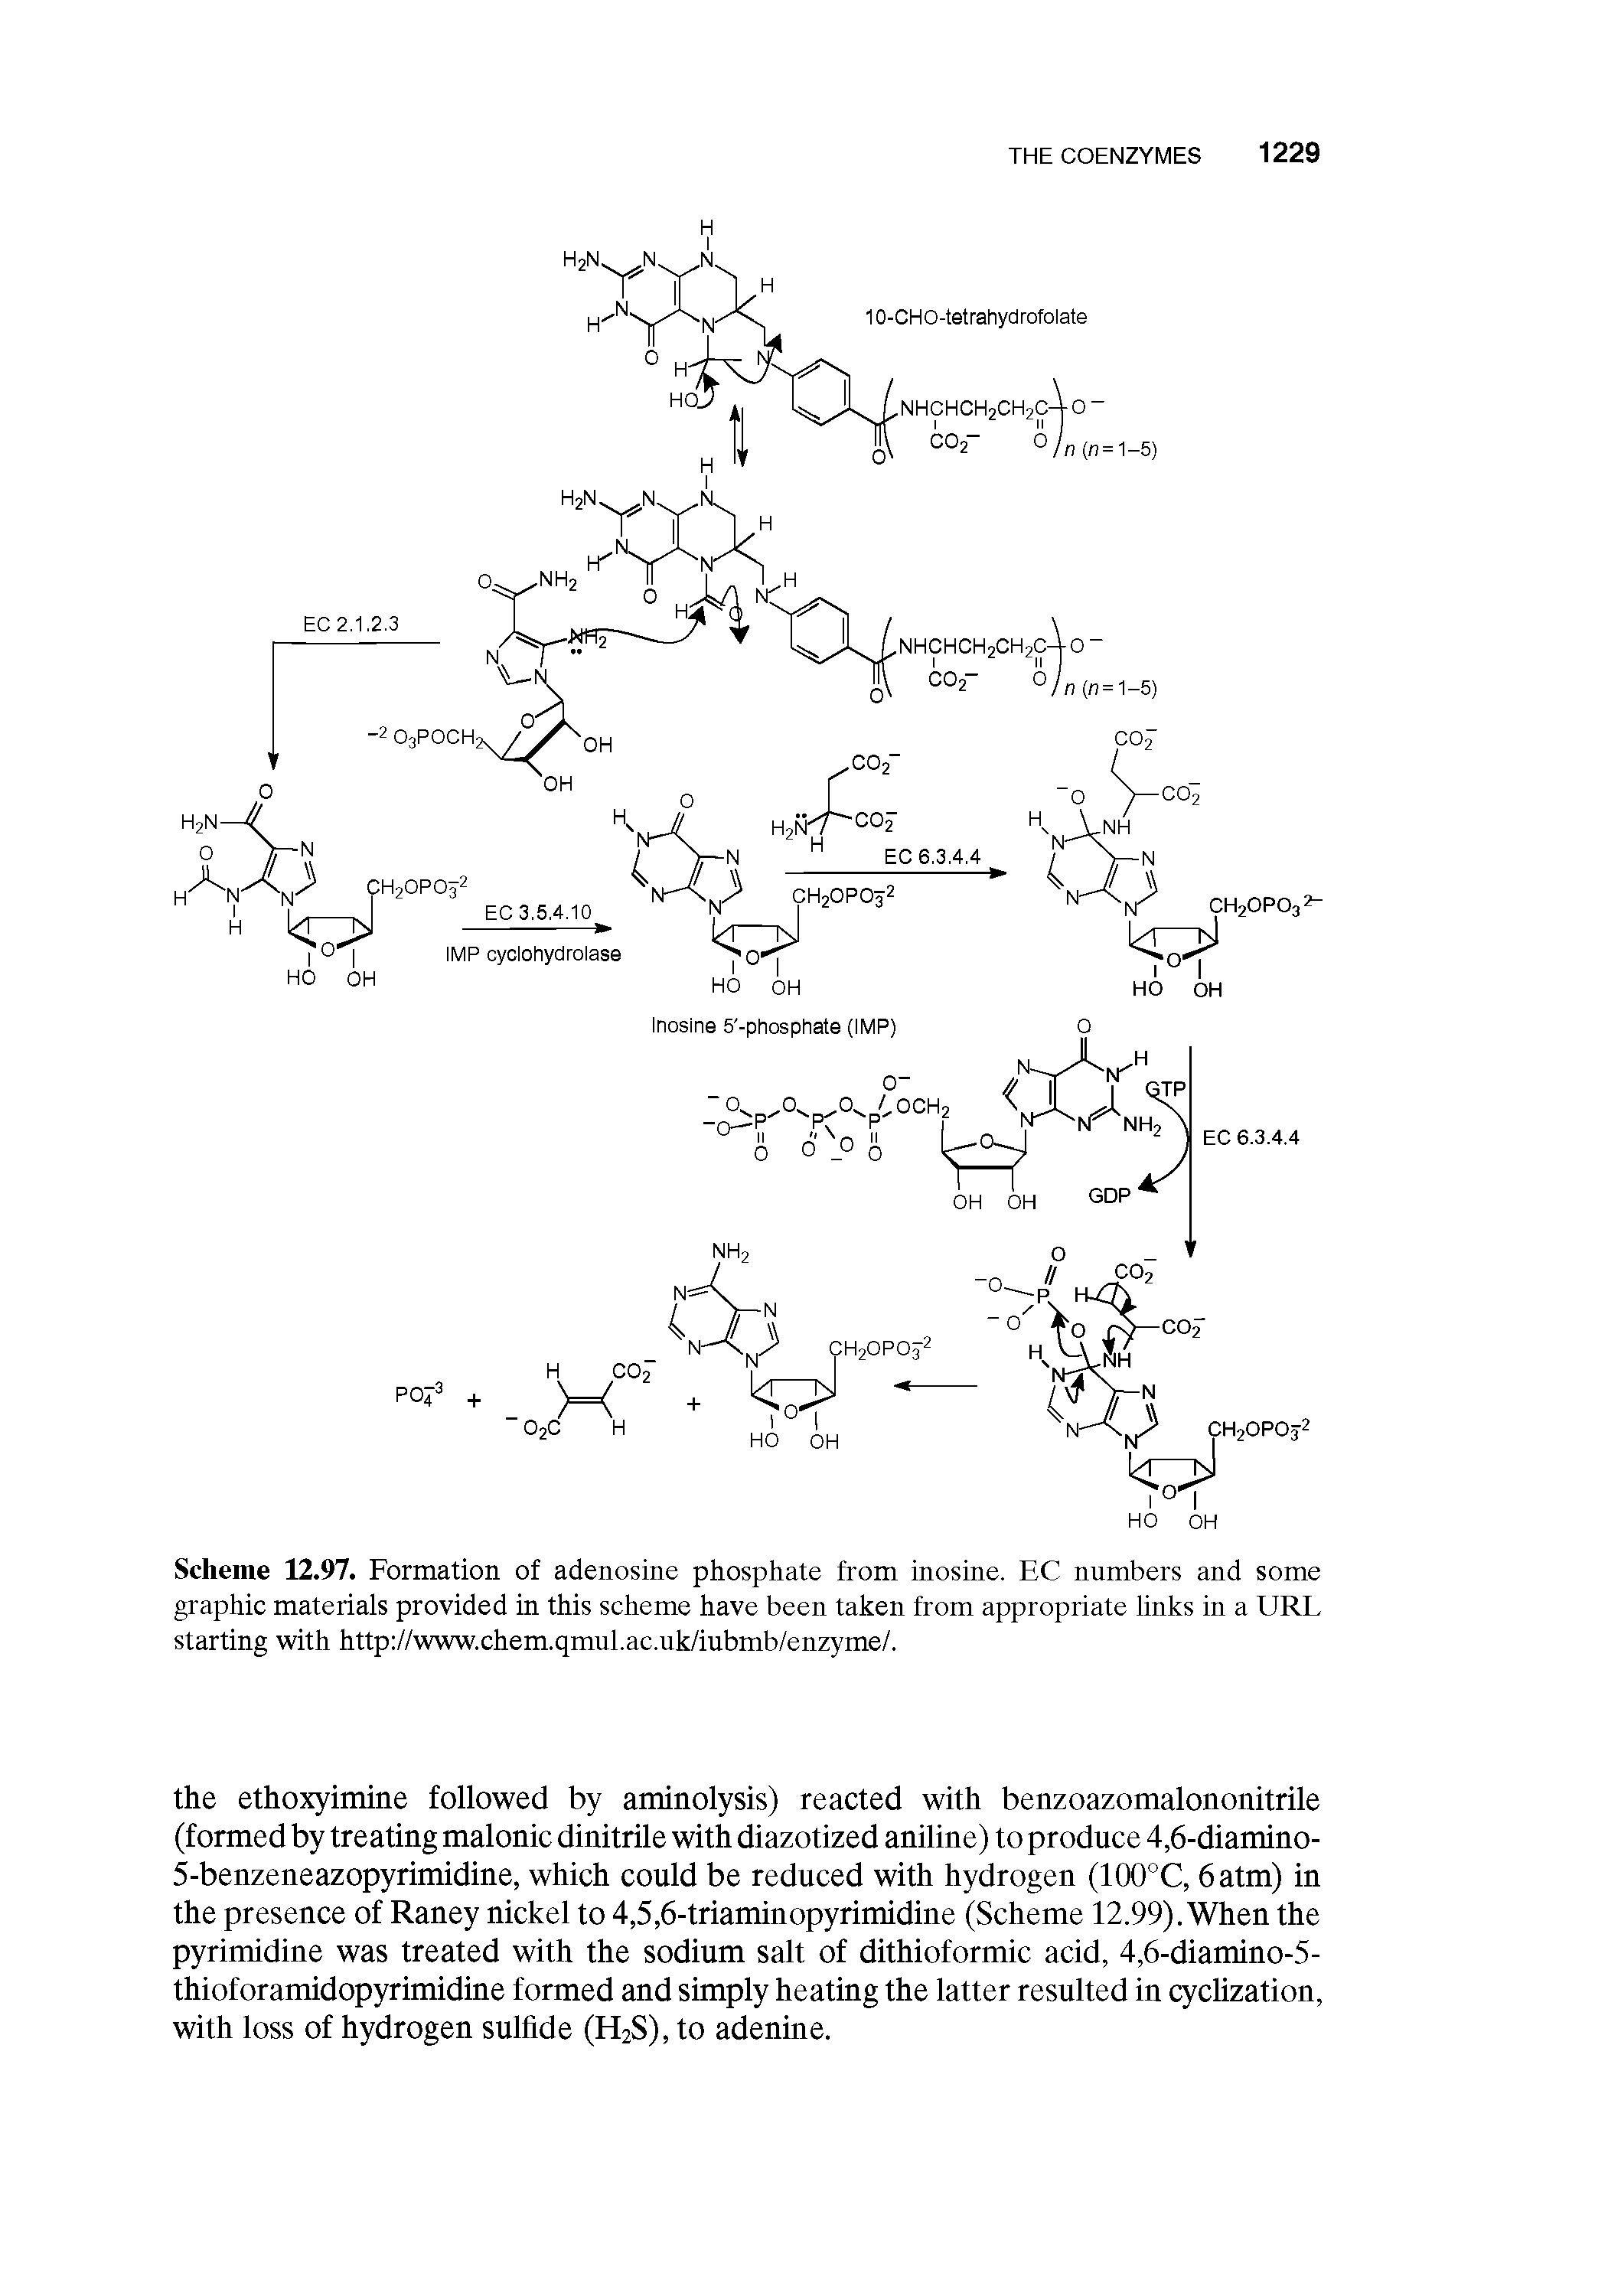 Scheme 12.97. Formation of adenosine phosphate from inosine. EC numbers and some graphic materials provided in this scheme have been taken from appropriate links in a URL starting with http //www.chem.qmul.ac.uk/iubmb/enzyme/.